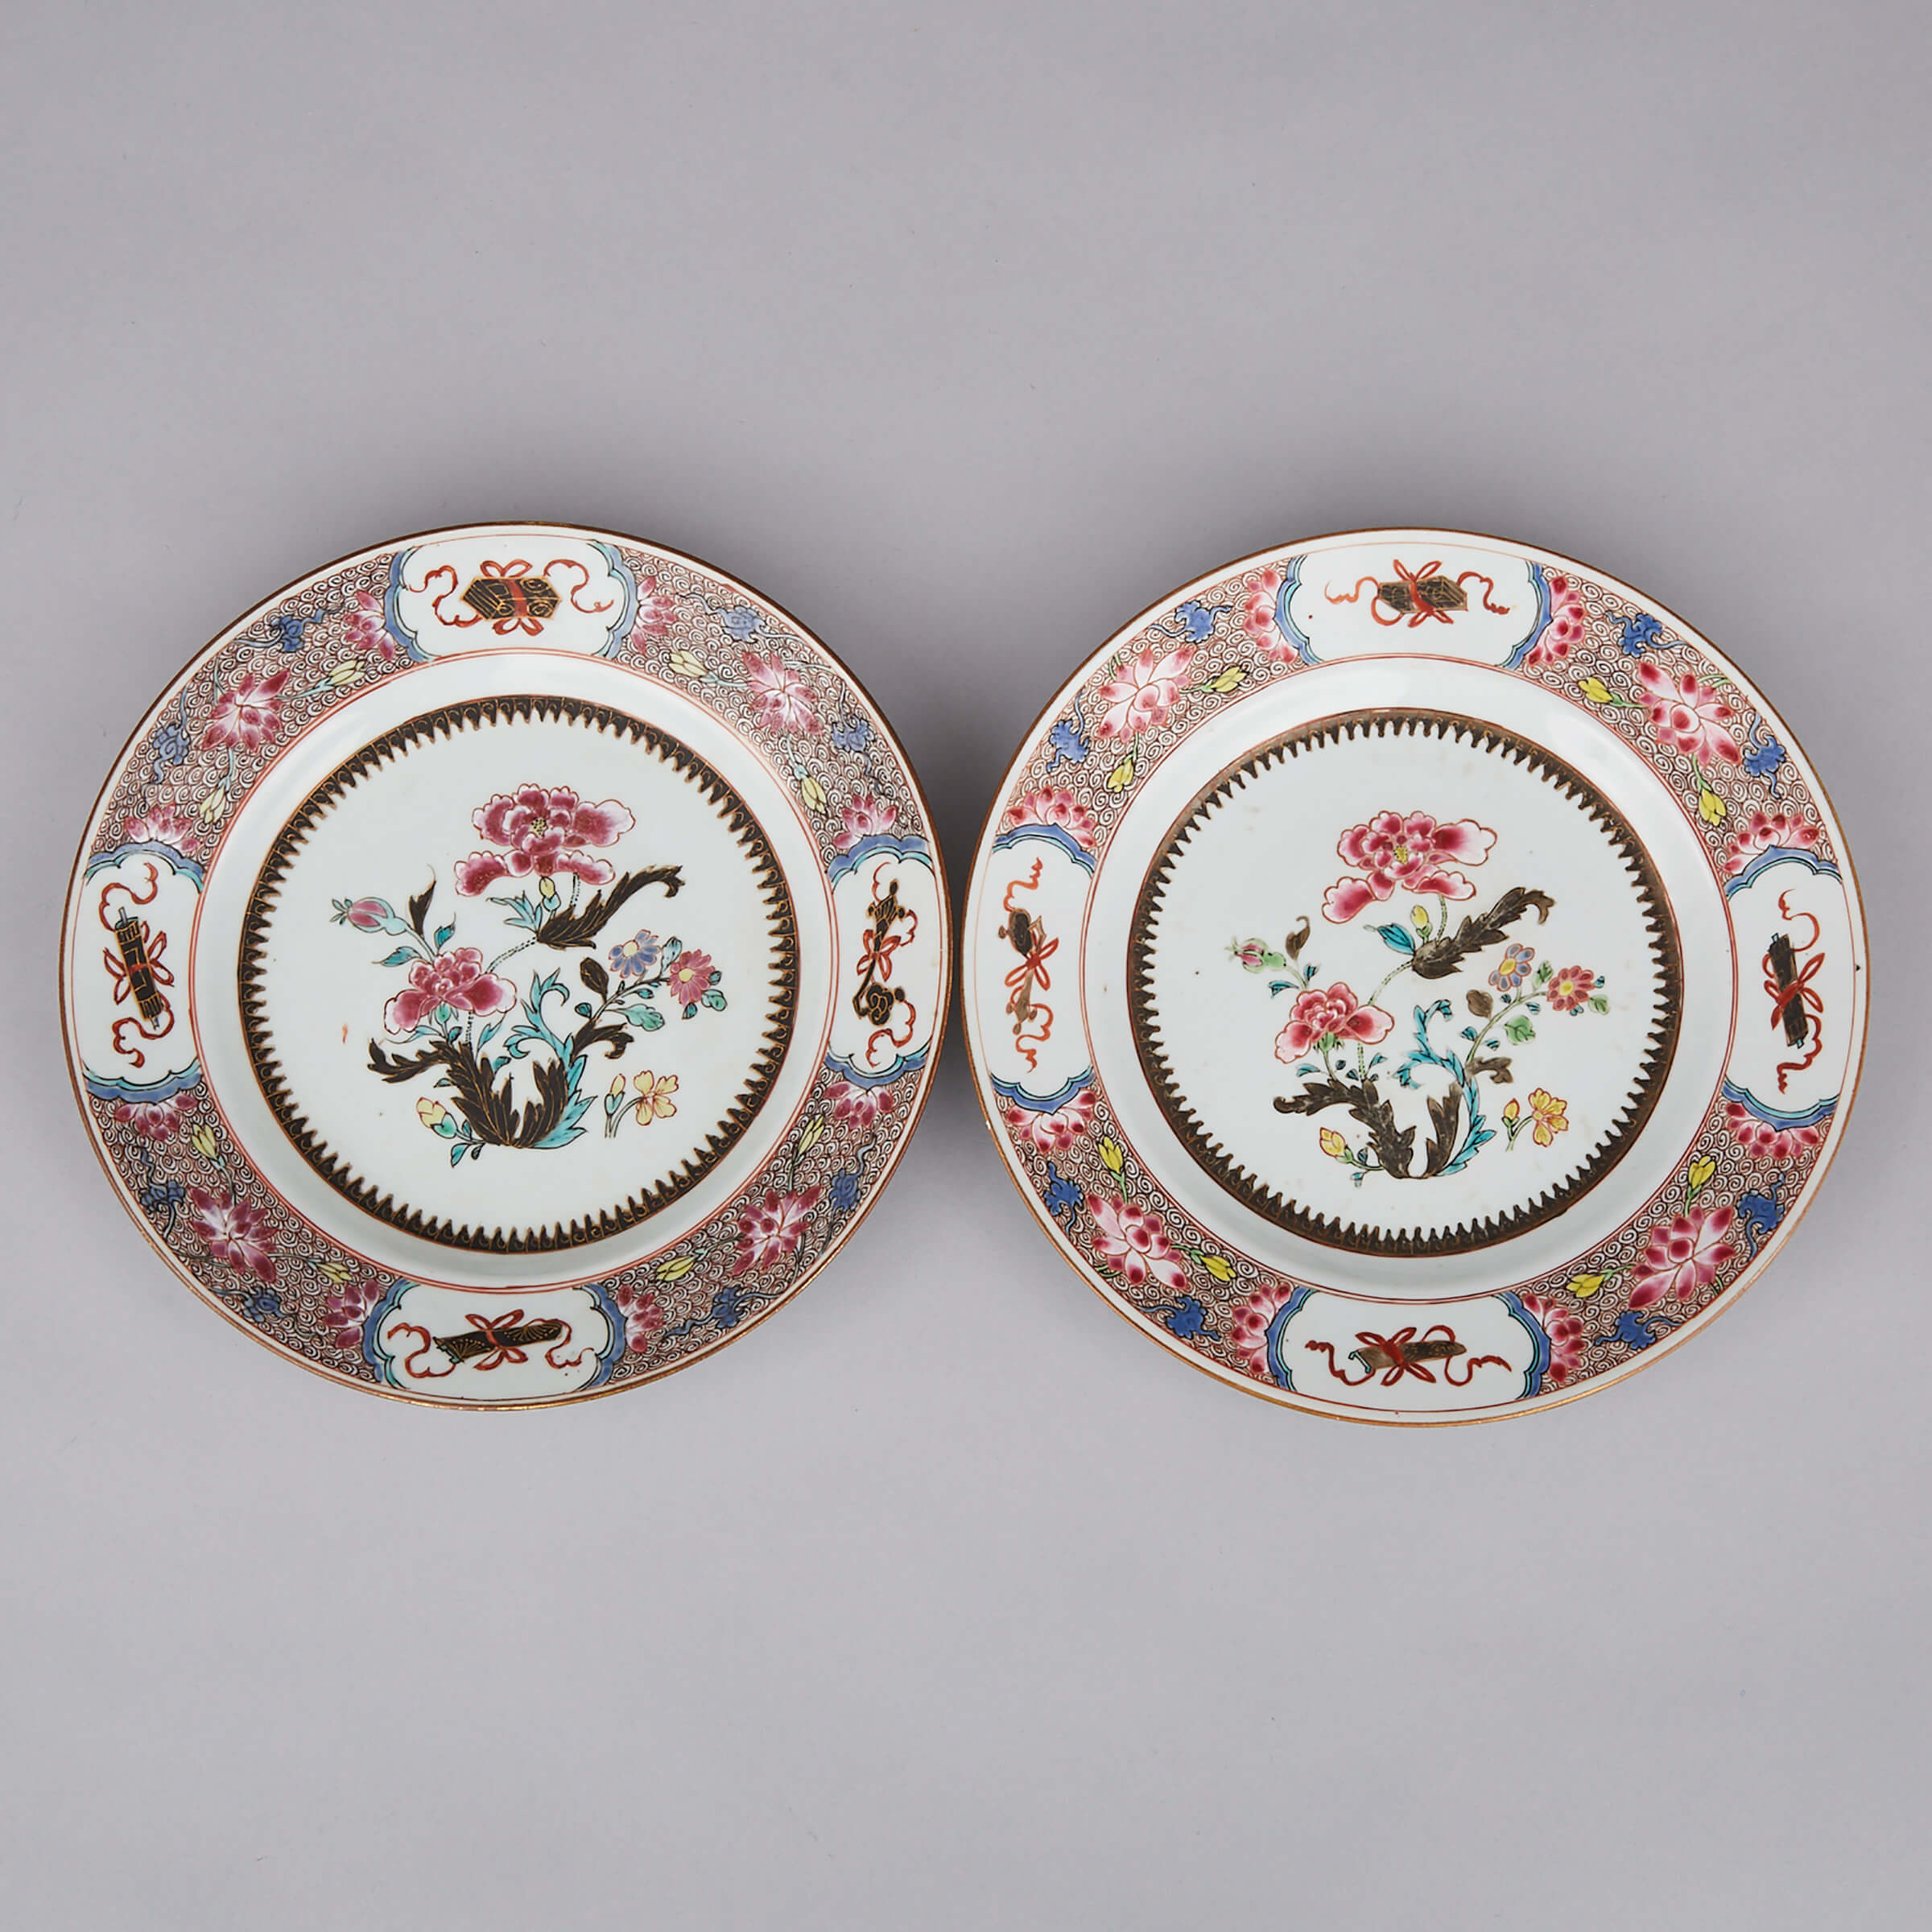 A Pair of Famille Rose Export Plates, Yongzheng Period, 18th Century